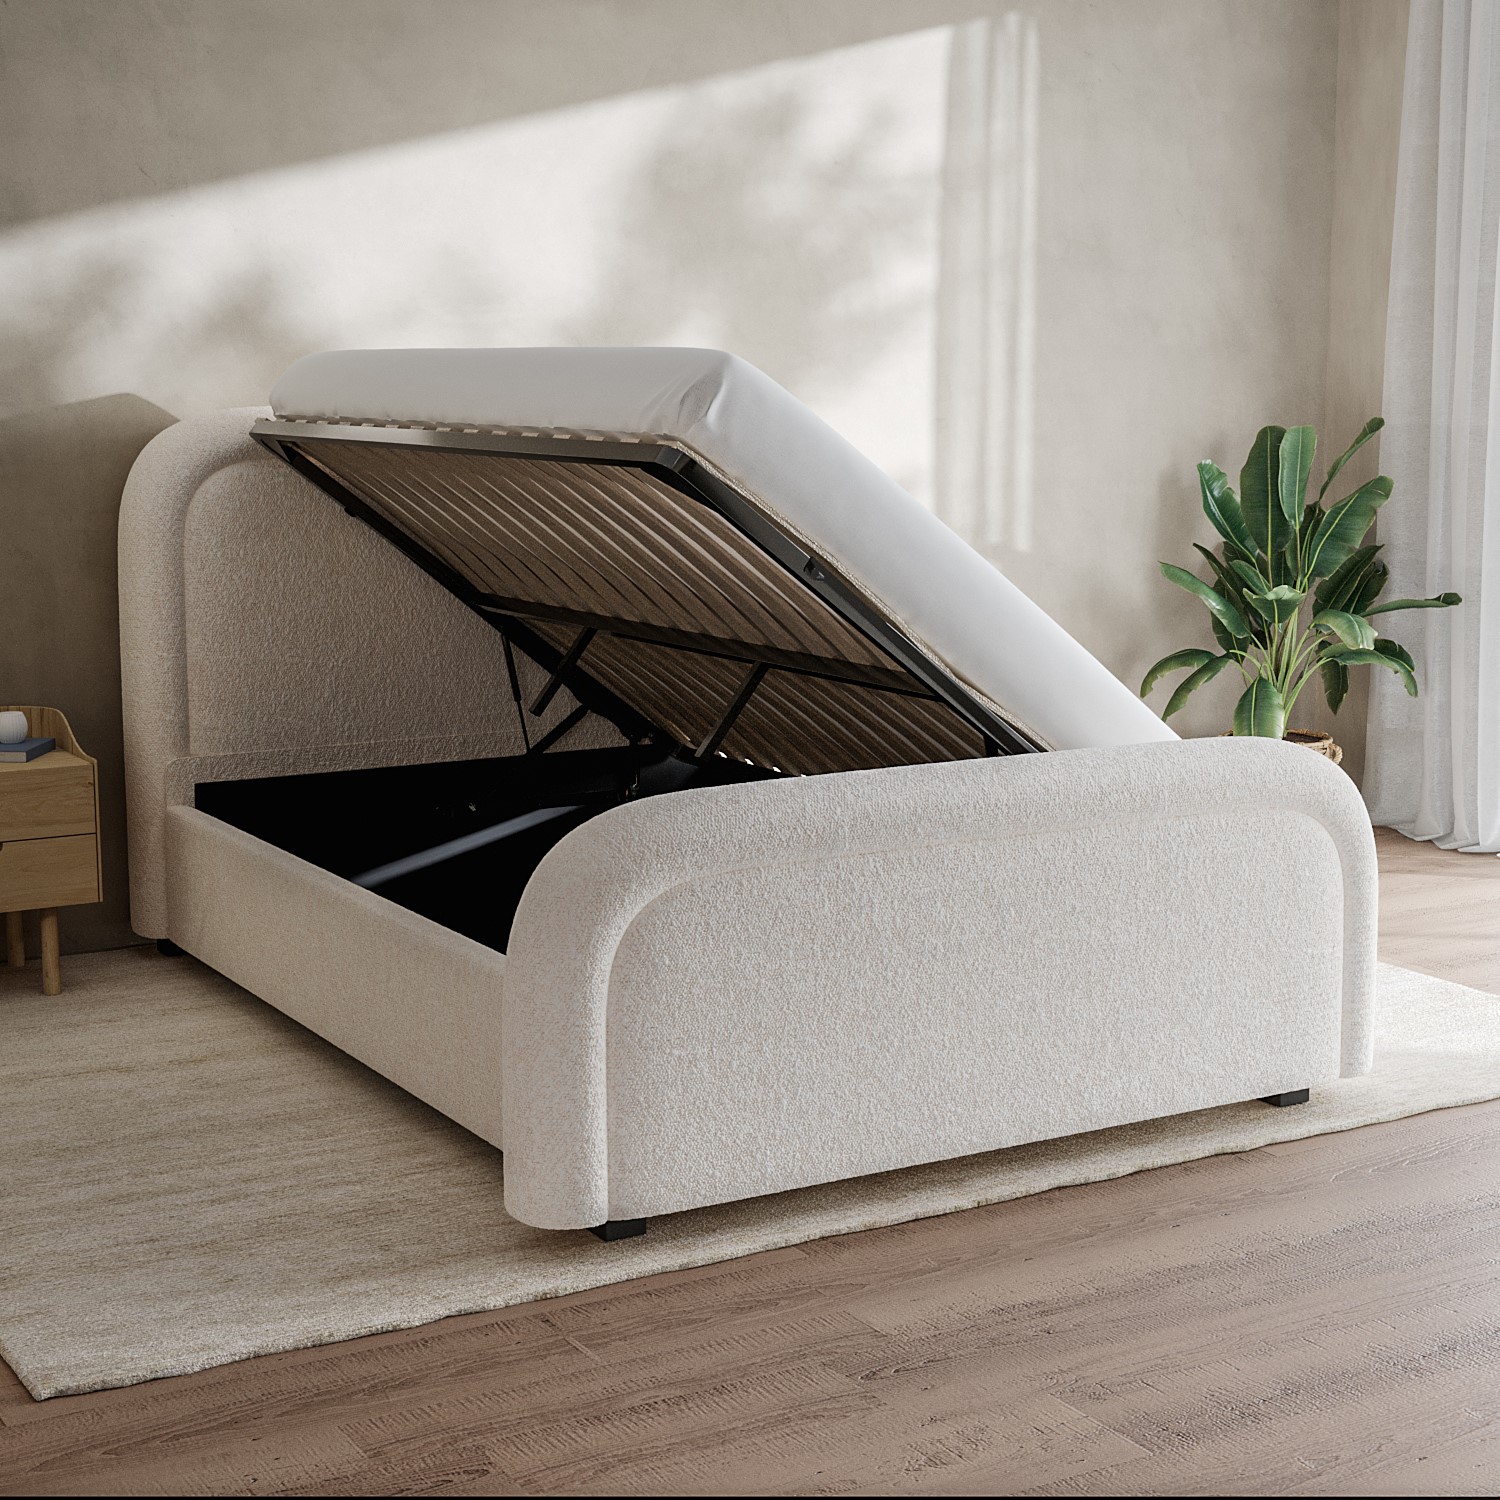 Read more about Off-white boucle double ottoman bed with curved headboard naomi